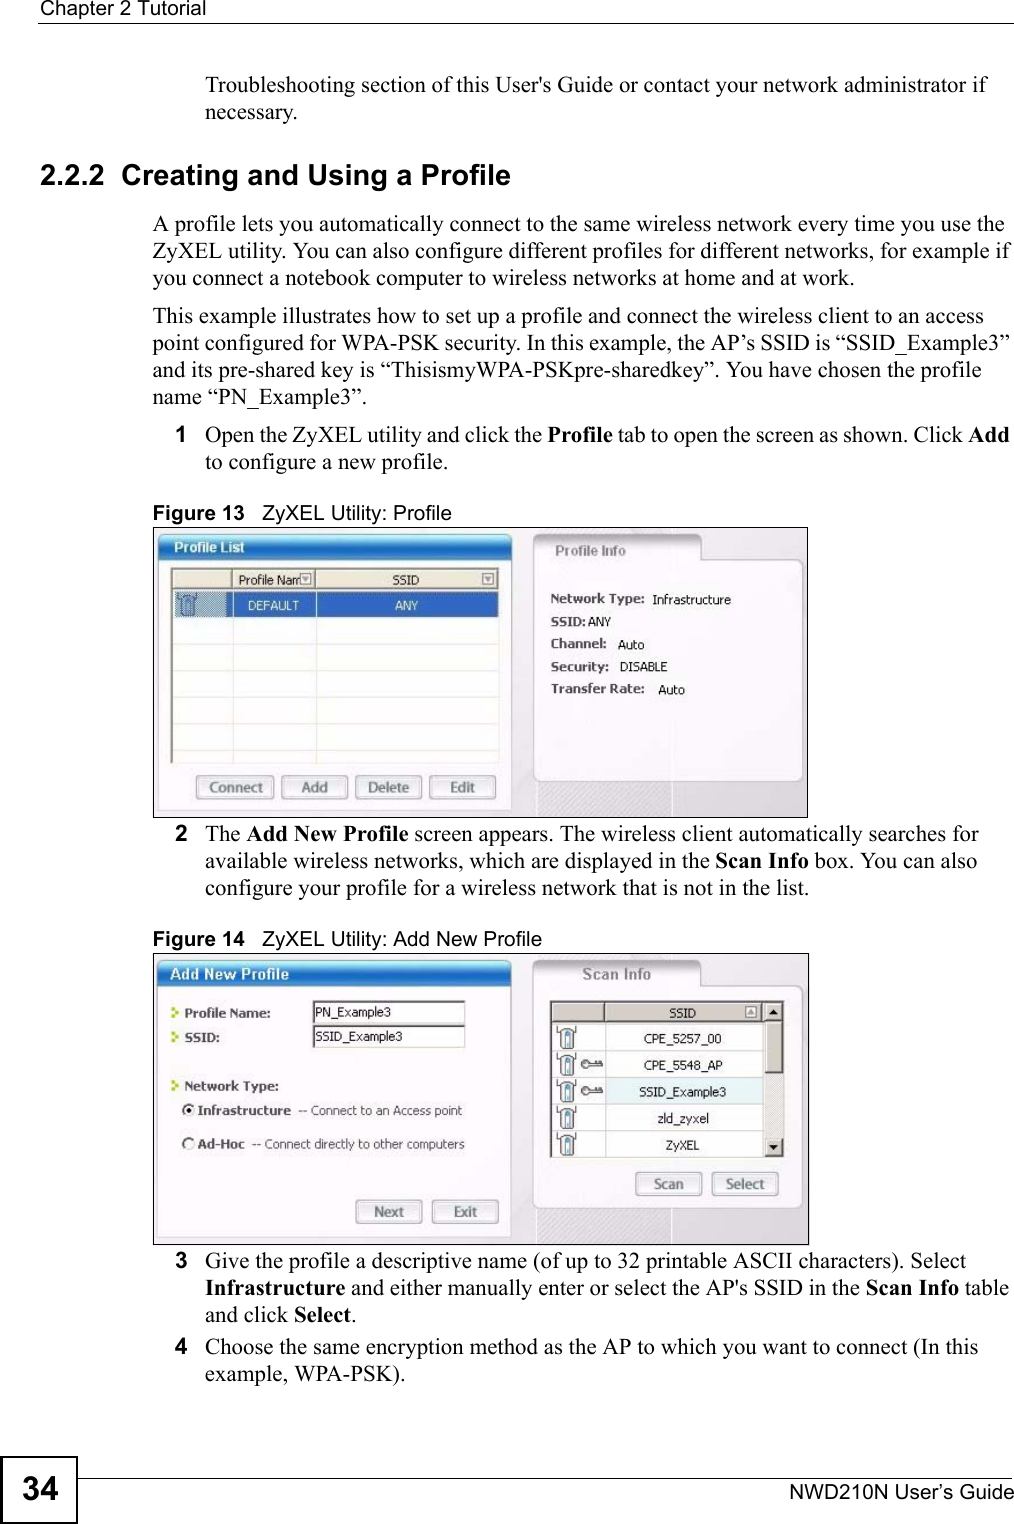 Chapter 2 TutorialNWD210N User’s Guide34Troubleshooting section of this User&apos;s Guide or contact your network administrator if necessary.2.2.2  Creating and Using a ProfileA profile lets you automatically connect to the same wireless network every time you use the ZyXEL utility. You can also configure different profiles for different networks, for example if you connect a notebook computer to wireless networks at home and at work.This example illustrates how to set up a profile and connect the wireless client to an access point configured for WPA-PSK security. In this example, the AP’s SSID is “SSID_Example3” and its pre-shared key is “ThisismyWPA-PSKpre-sharedkey”. You have chosen the profile name “PN_Example3”.1Open the ZyXEL utility and click the Profile tab to open the screen as shown. Click Add to configure a new profile.Figure 13   ZyXEL Utility: Profile2The Add New Profile screen appears. The wireless client automatically searches for available wireless networks, which are displayed in the Scan Info box. You can also configure your profile for a wireless network that is not in the list. Figure 14   ZyXEL Utility: Add New Profile3Give the profile a descriptive name (of up to 32 printable ASCII characters). Select Infrastructure and either manually enter or select the AP&apos;s SSID in the Scan Info table and click Select.4Choose the same encryption method as the AP to which you want to connect (In this example, WPA-PSK).